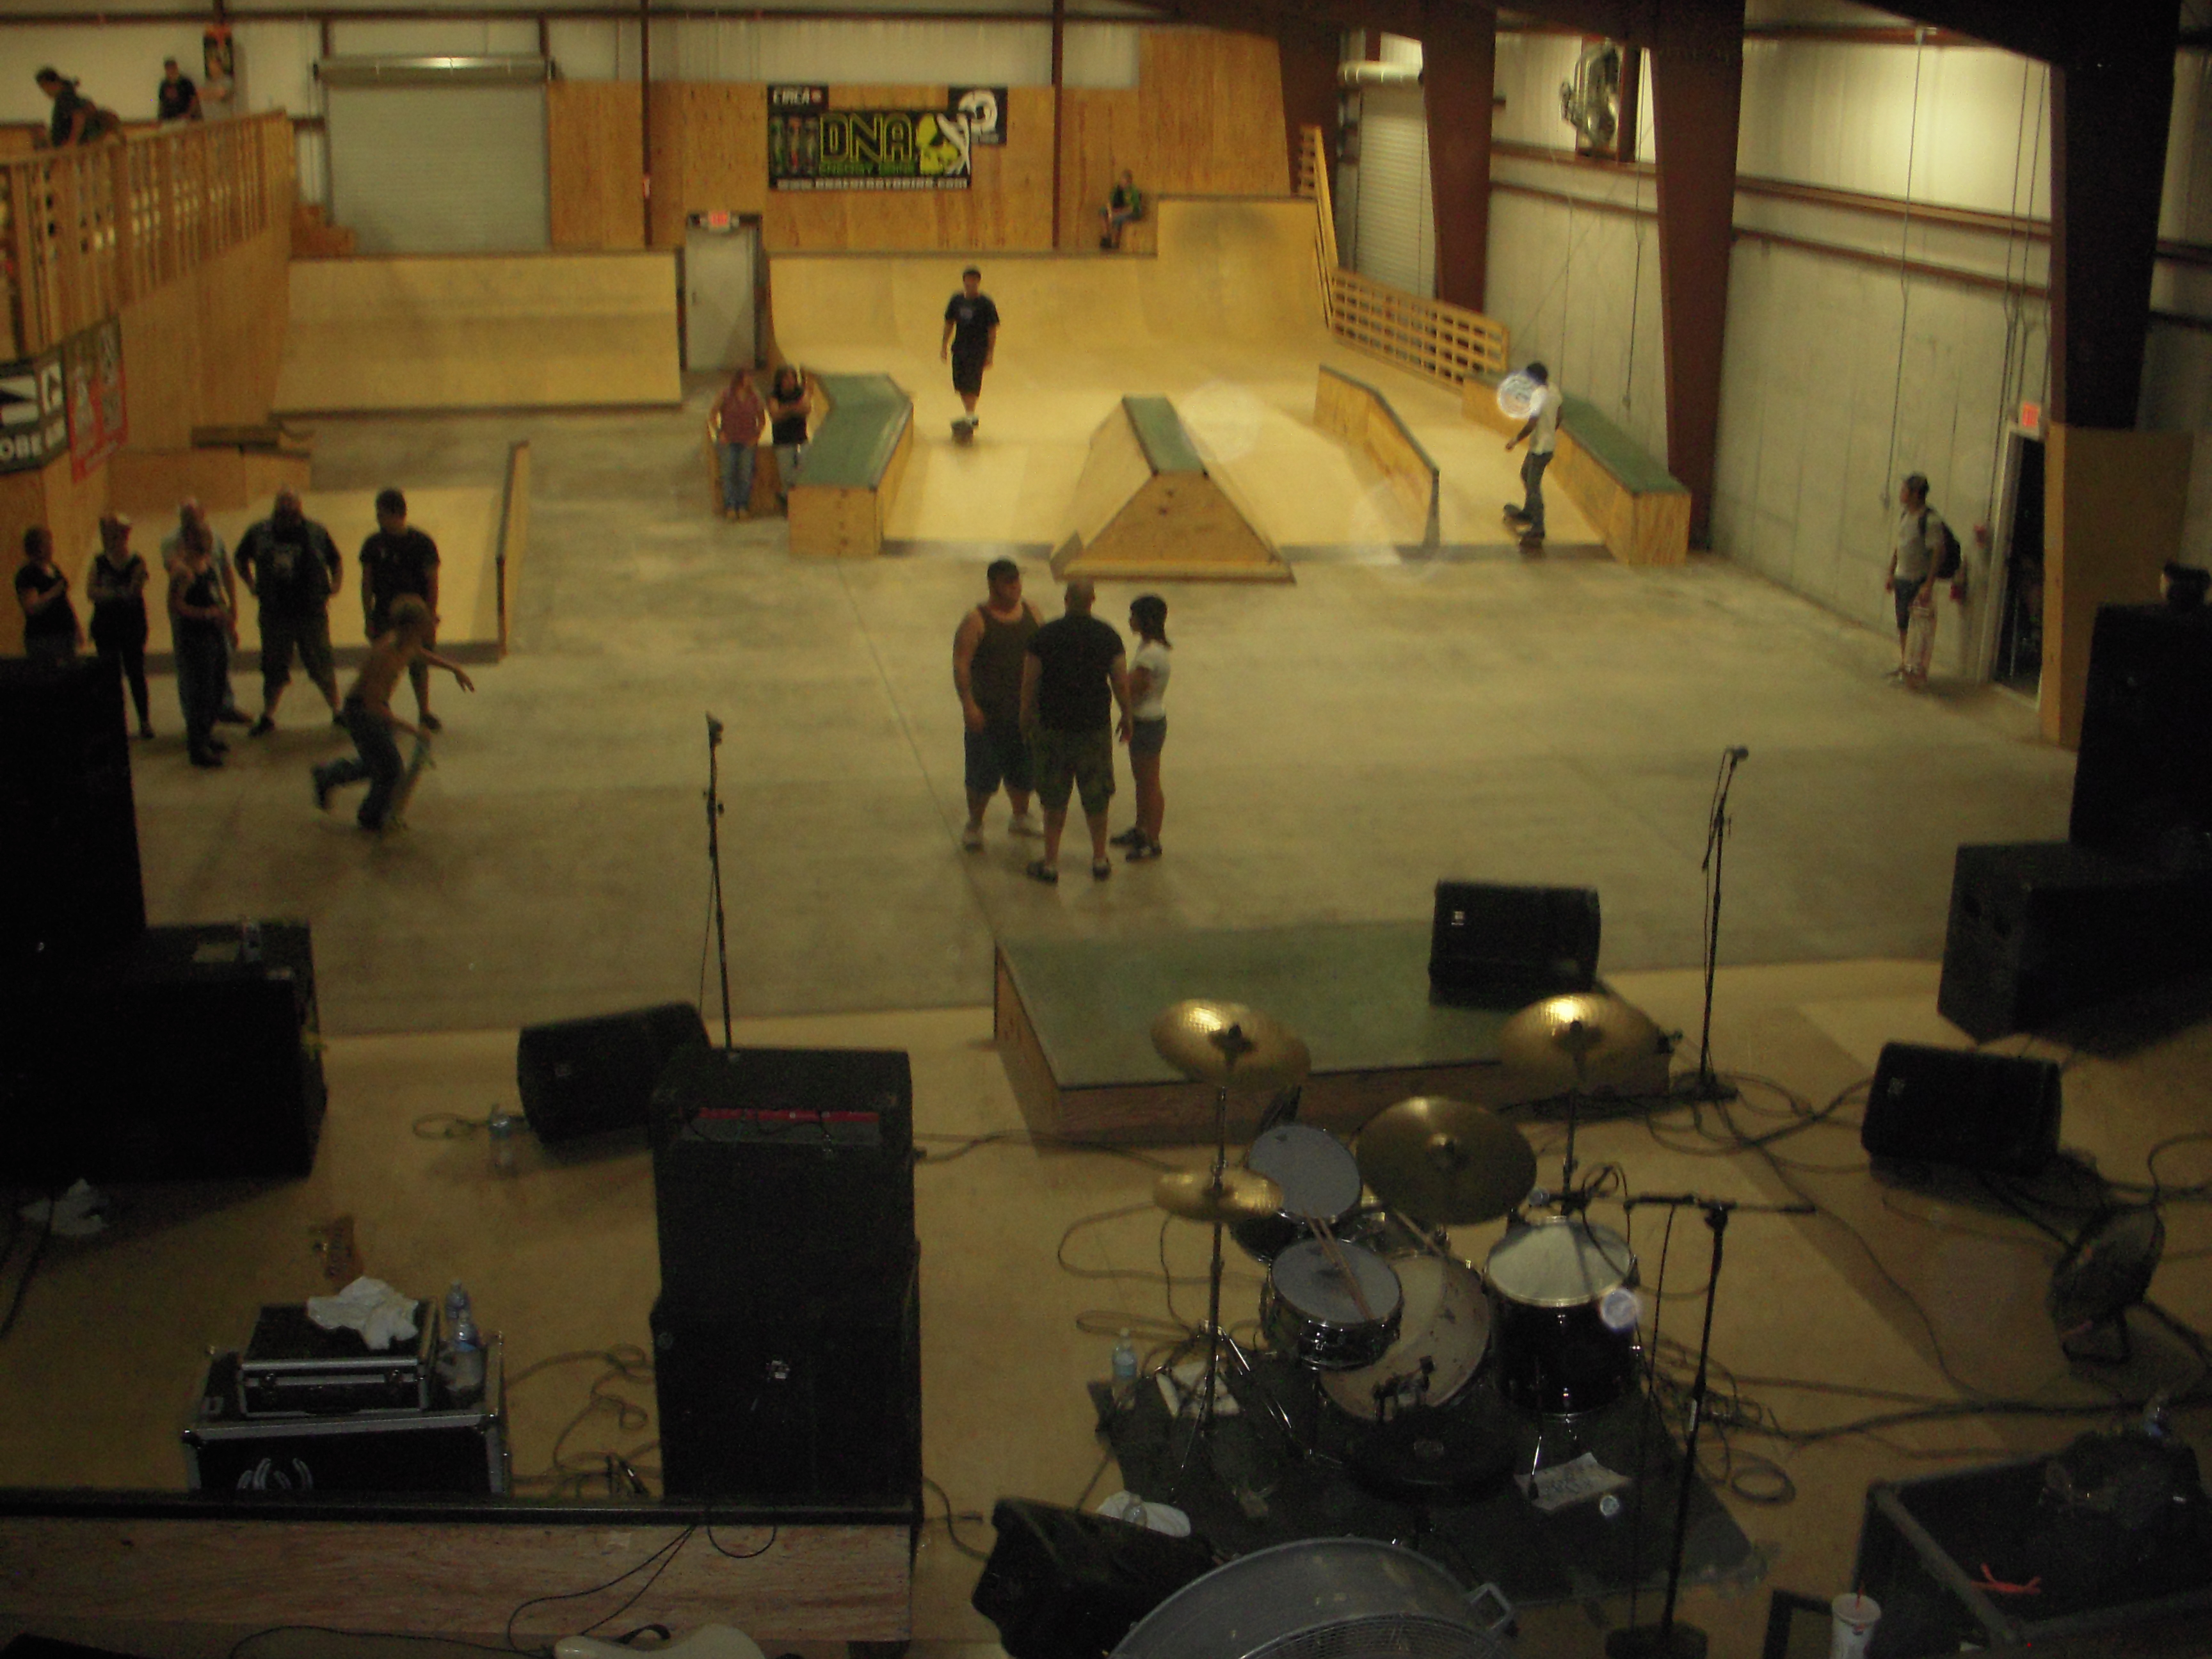 USA tour 2009 stage in a skate park